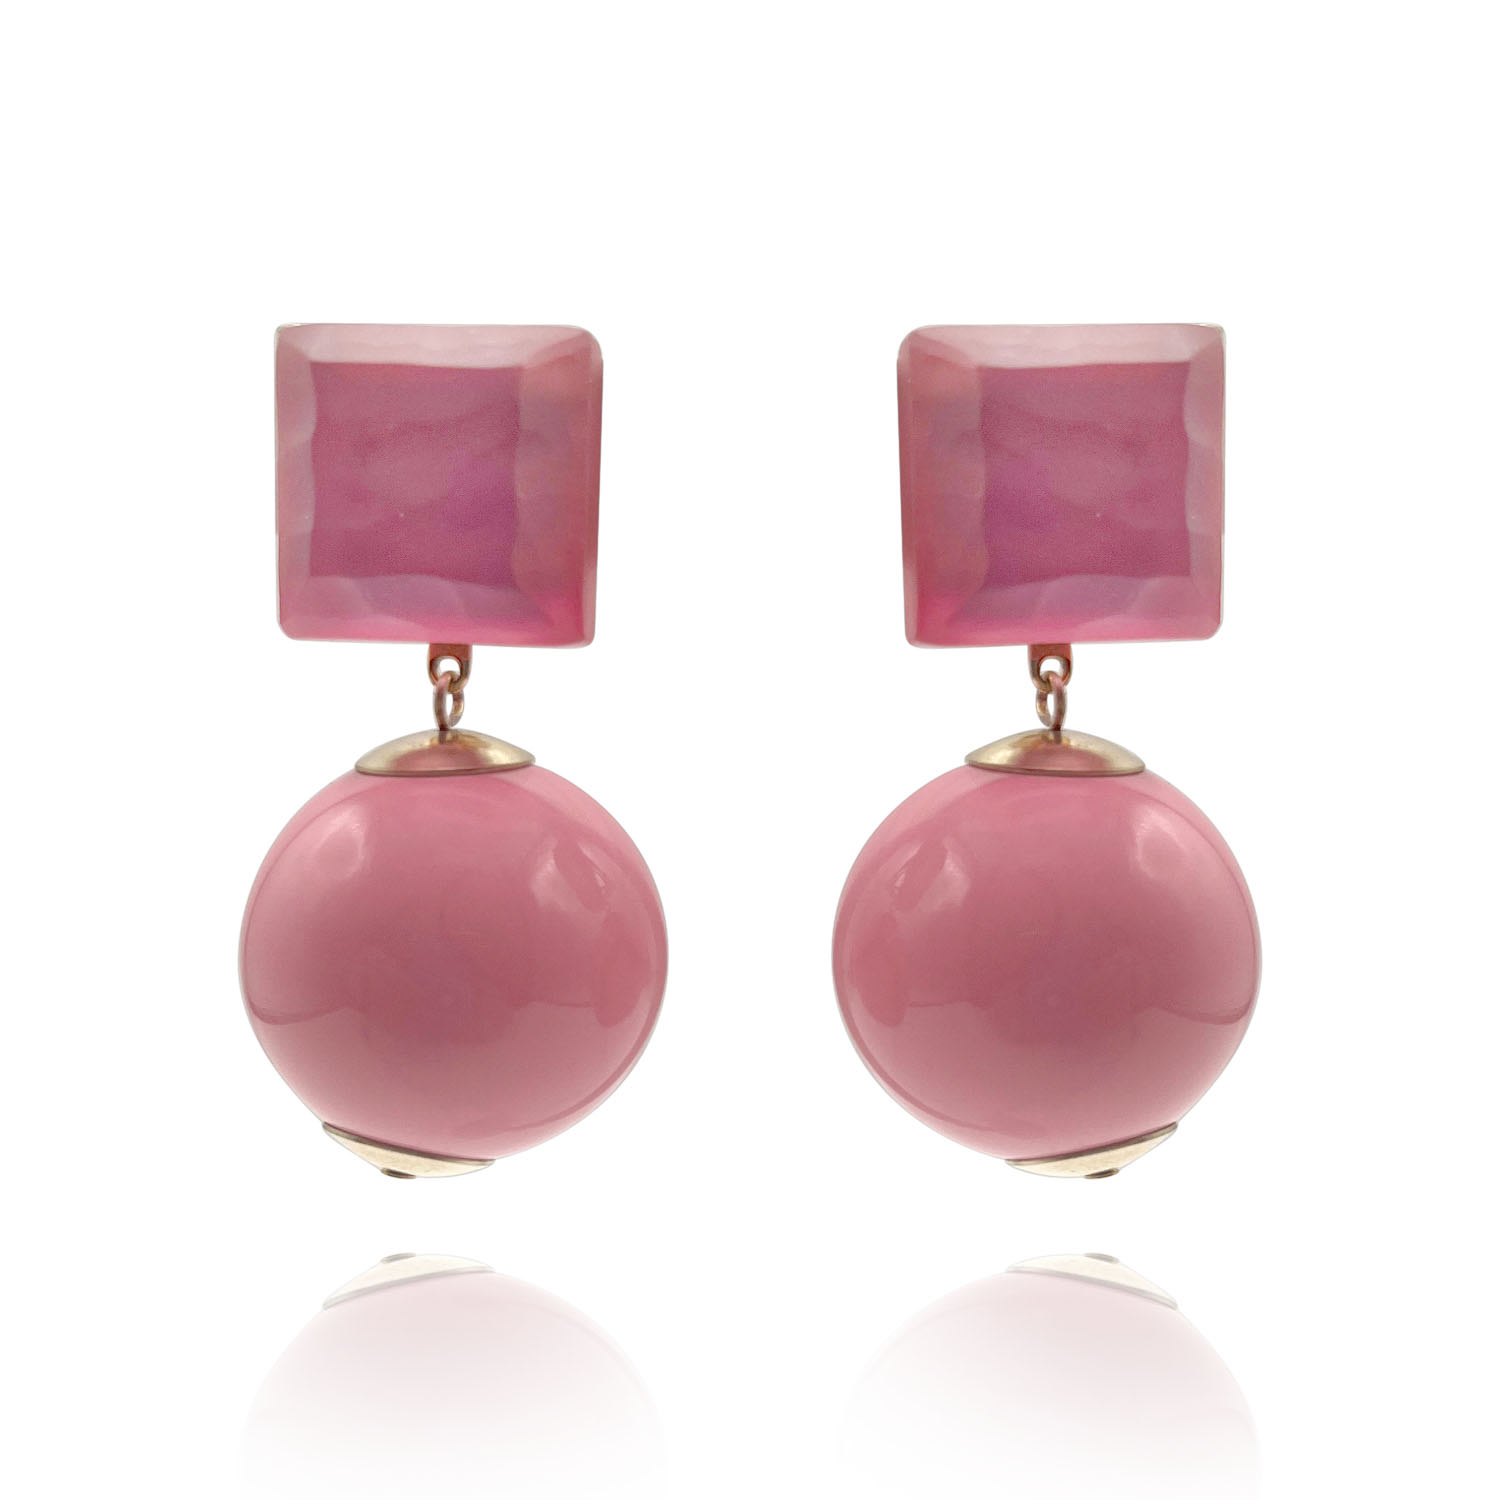 Women’s Pink / Purple Pink Clip On Earrings With Mirrored Top And Large Resin Ball Drop Michael Nash Jewelry